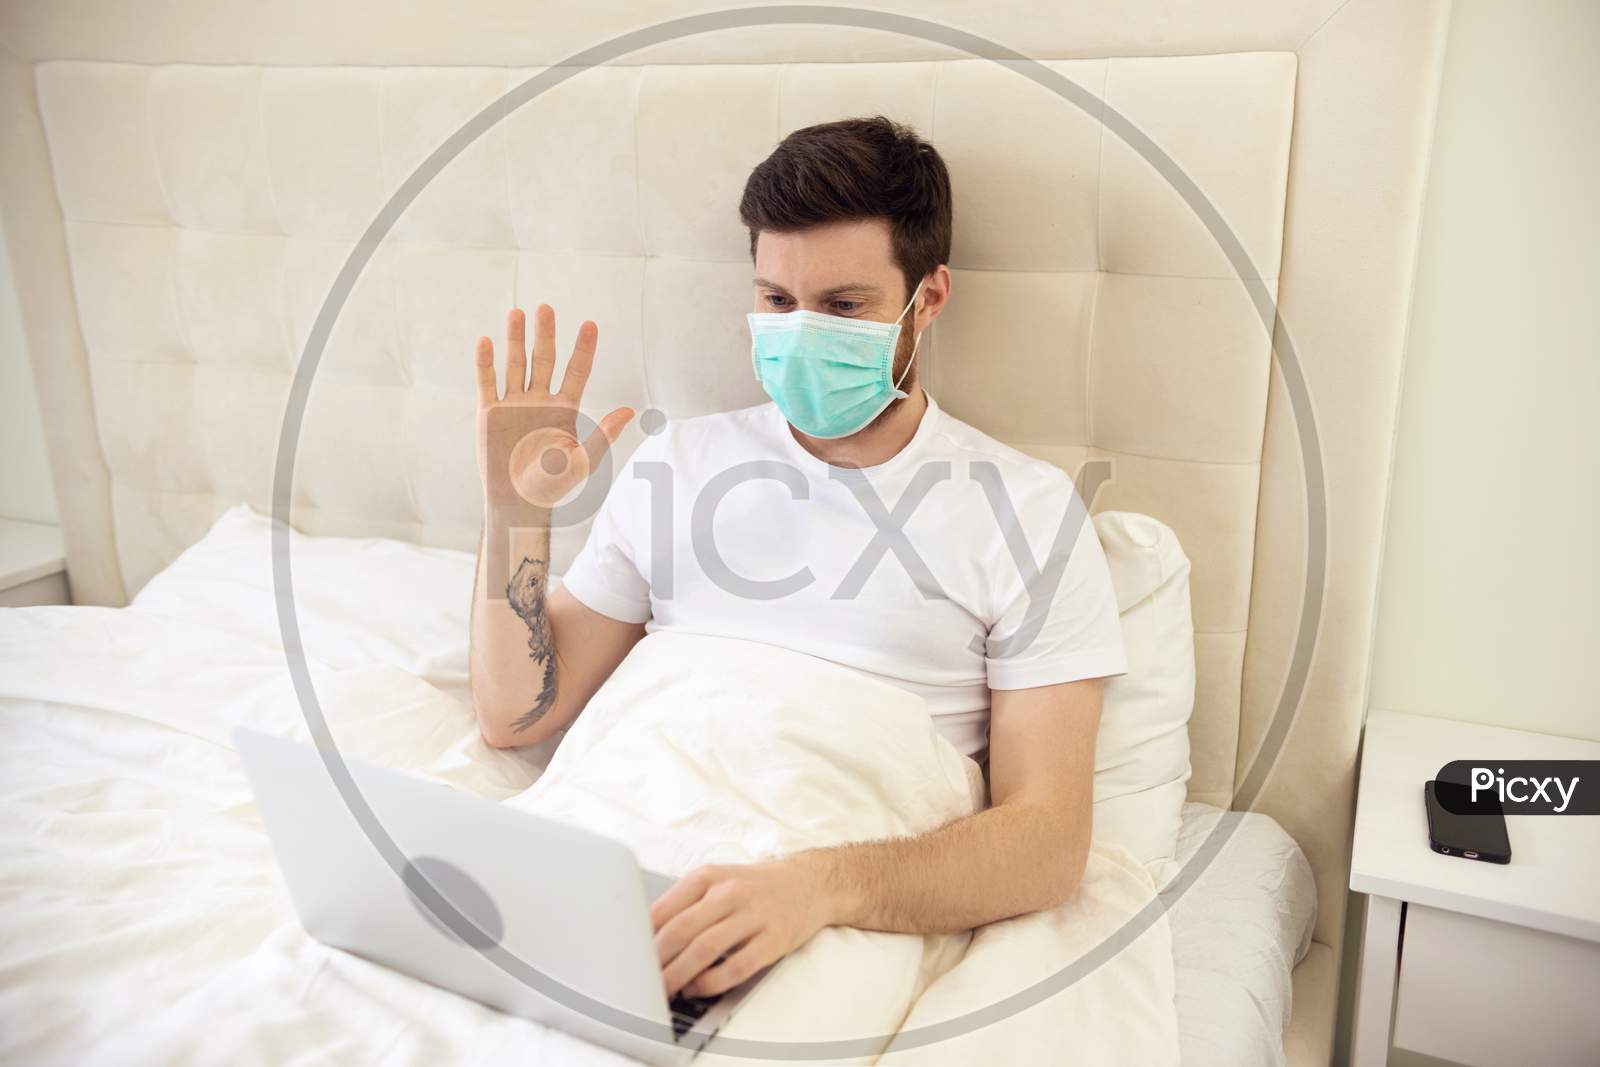 Man Having Video Call Video Conversation In Bed Wearing Medical Mask. Man Working At Home. Man Using Laptop In Bed. Man Ill. Quarantine, Home Work, Medical Care.